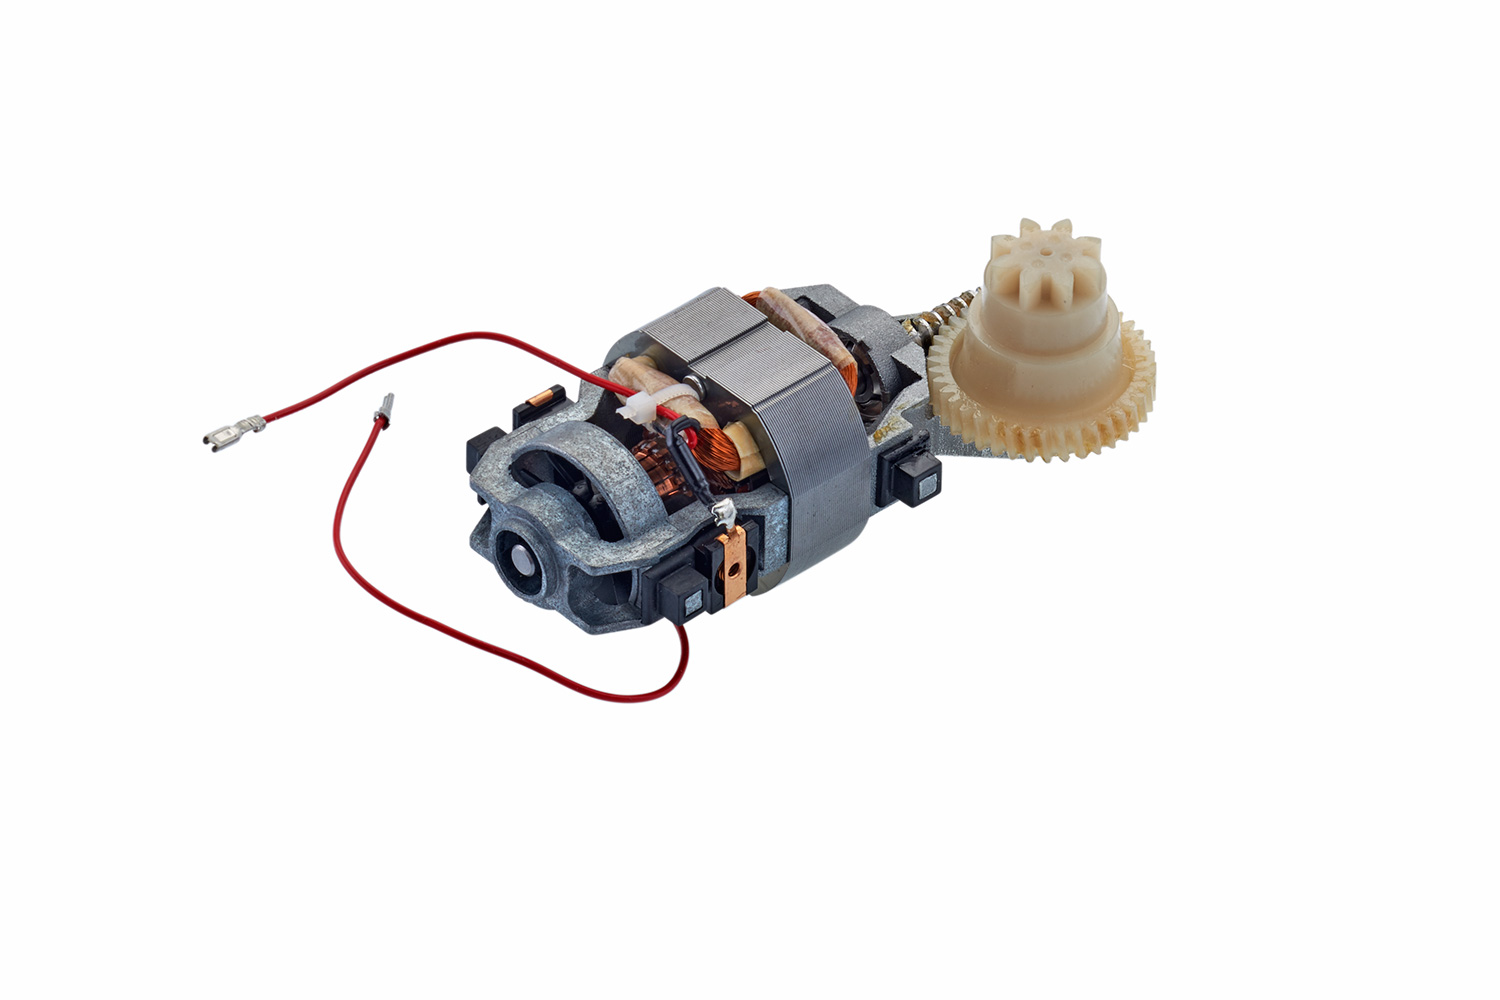 Motor with a white gear (right-handed operated)